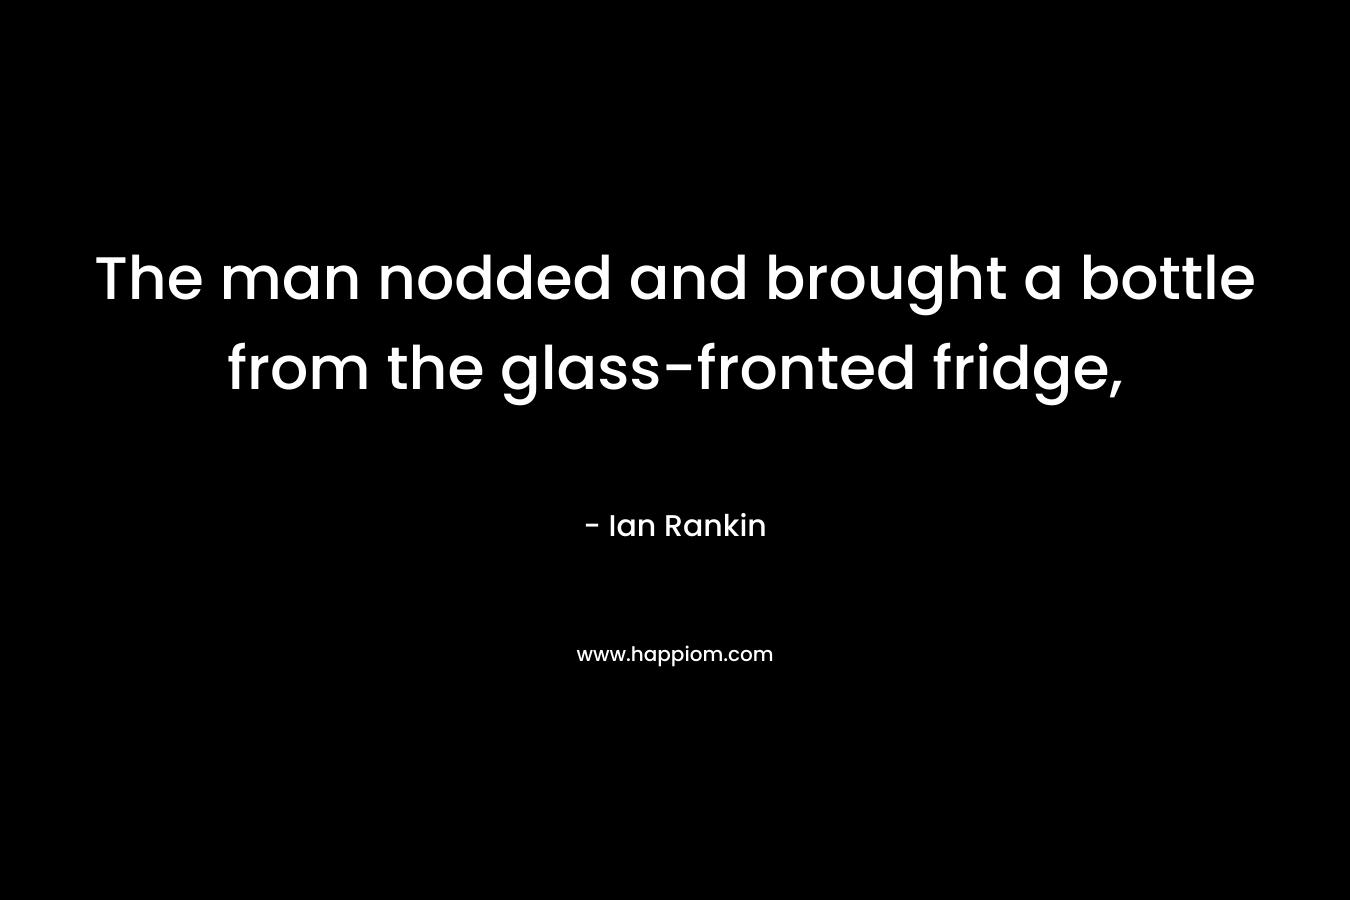 The man nodded and brought a bottle from the glass-fronted fridge, – Ian Rankin